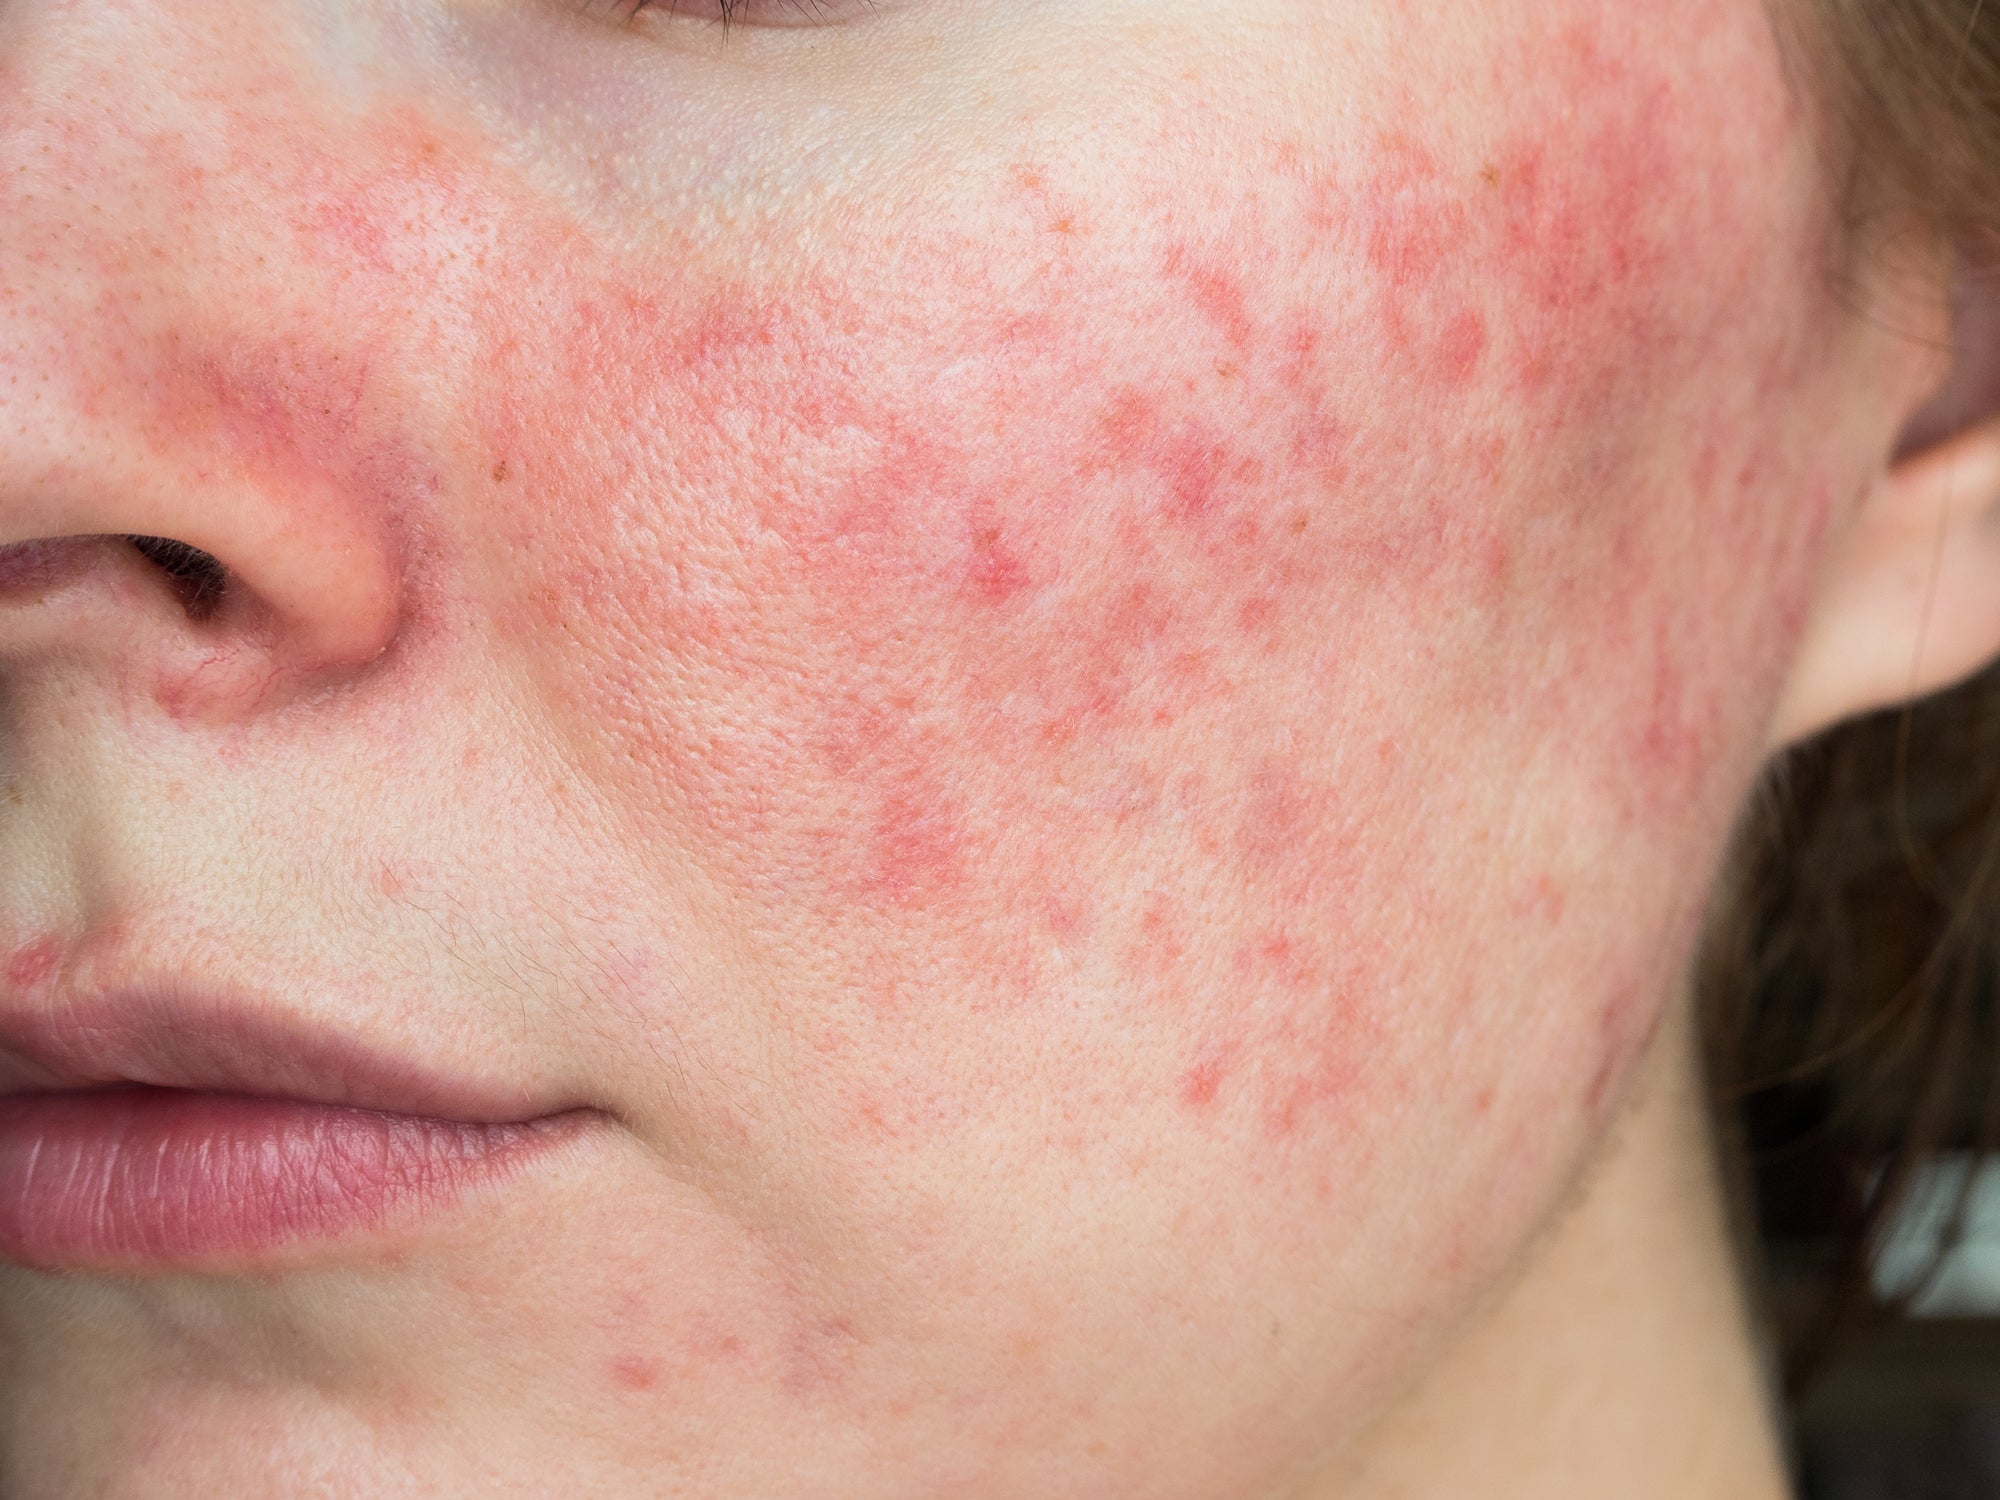 What Causes Acne Scars?